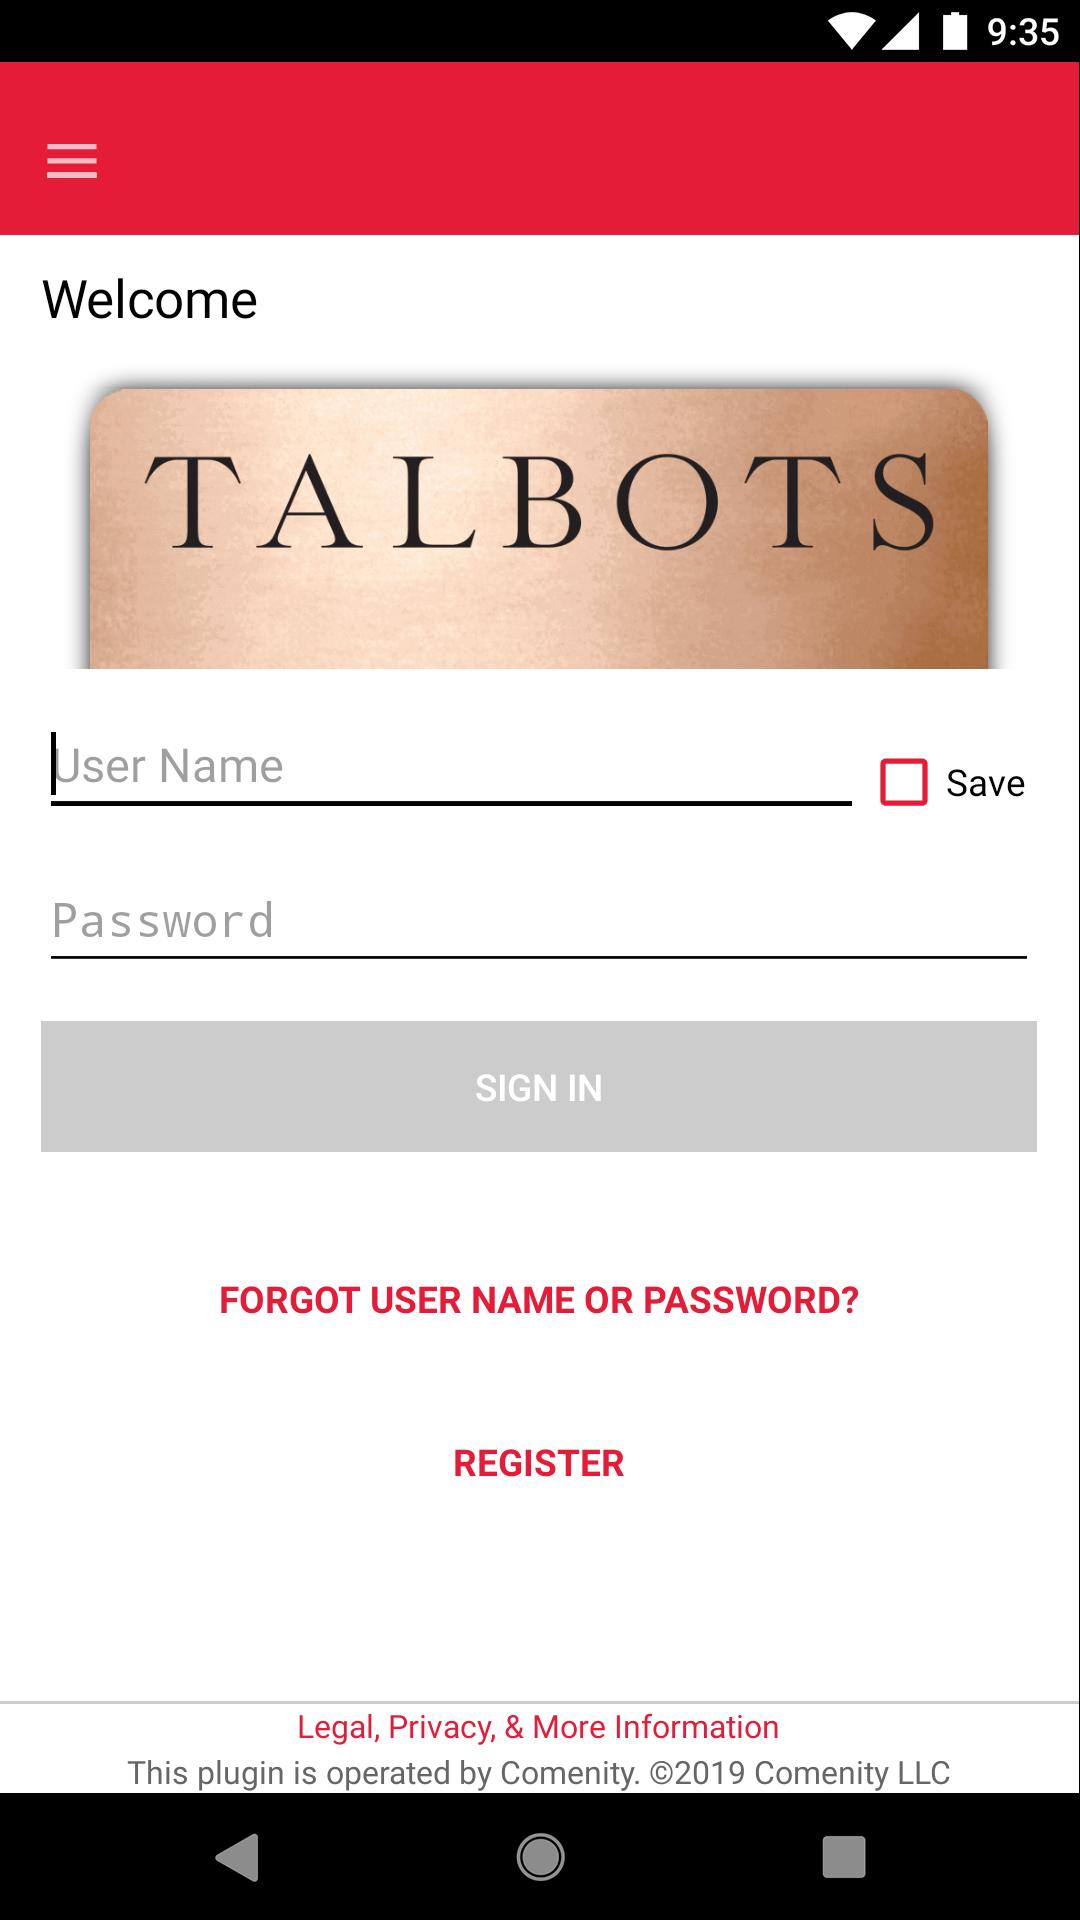 Talbots Credit Card App for Android - APK Download